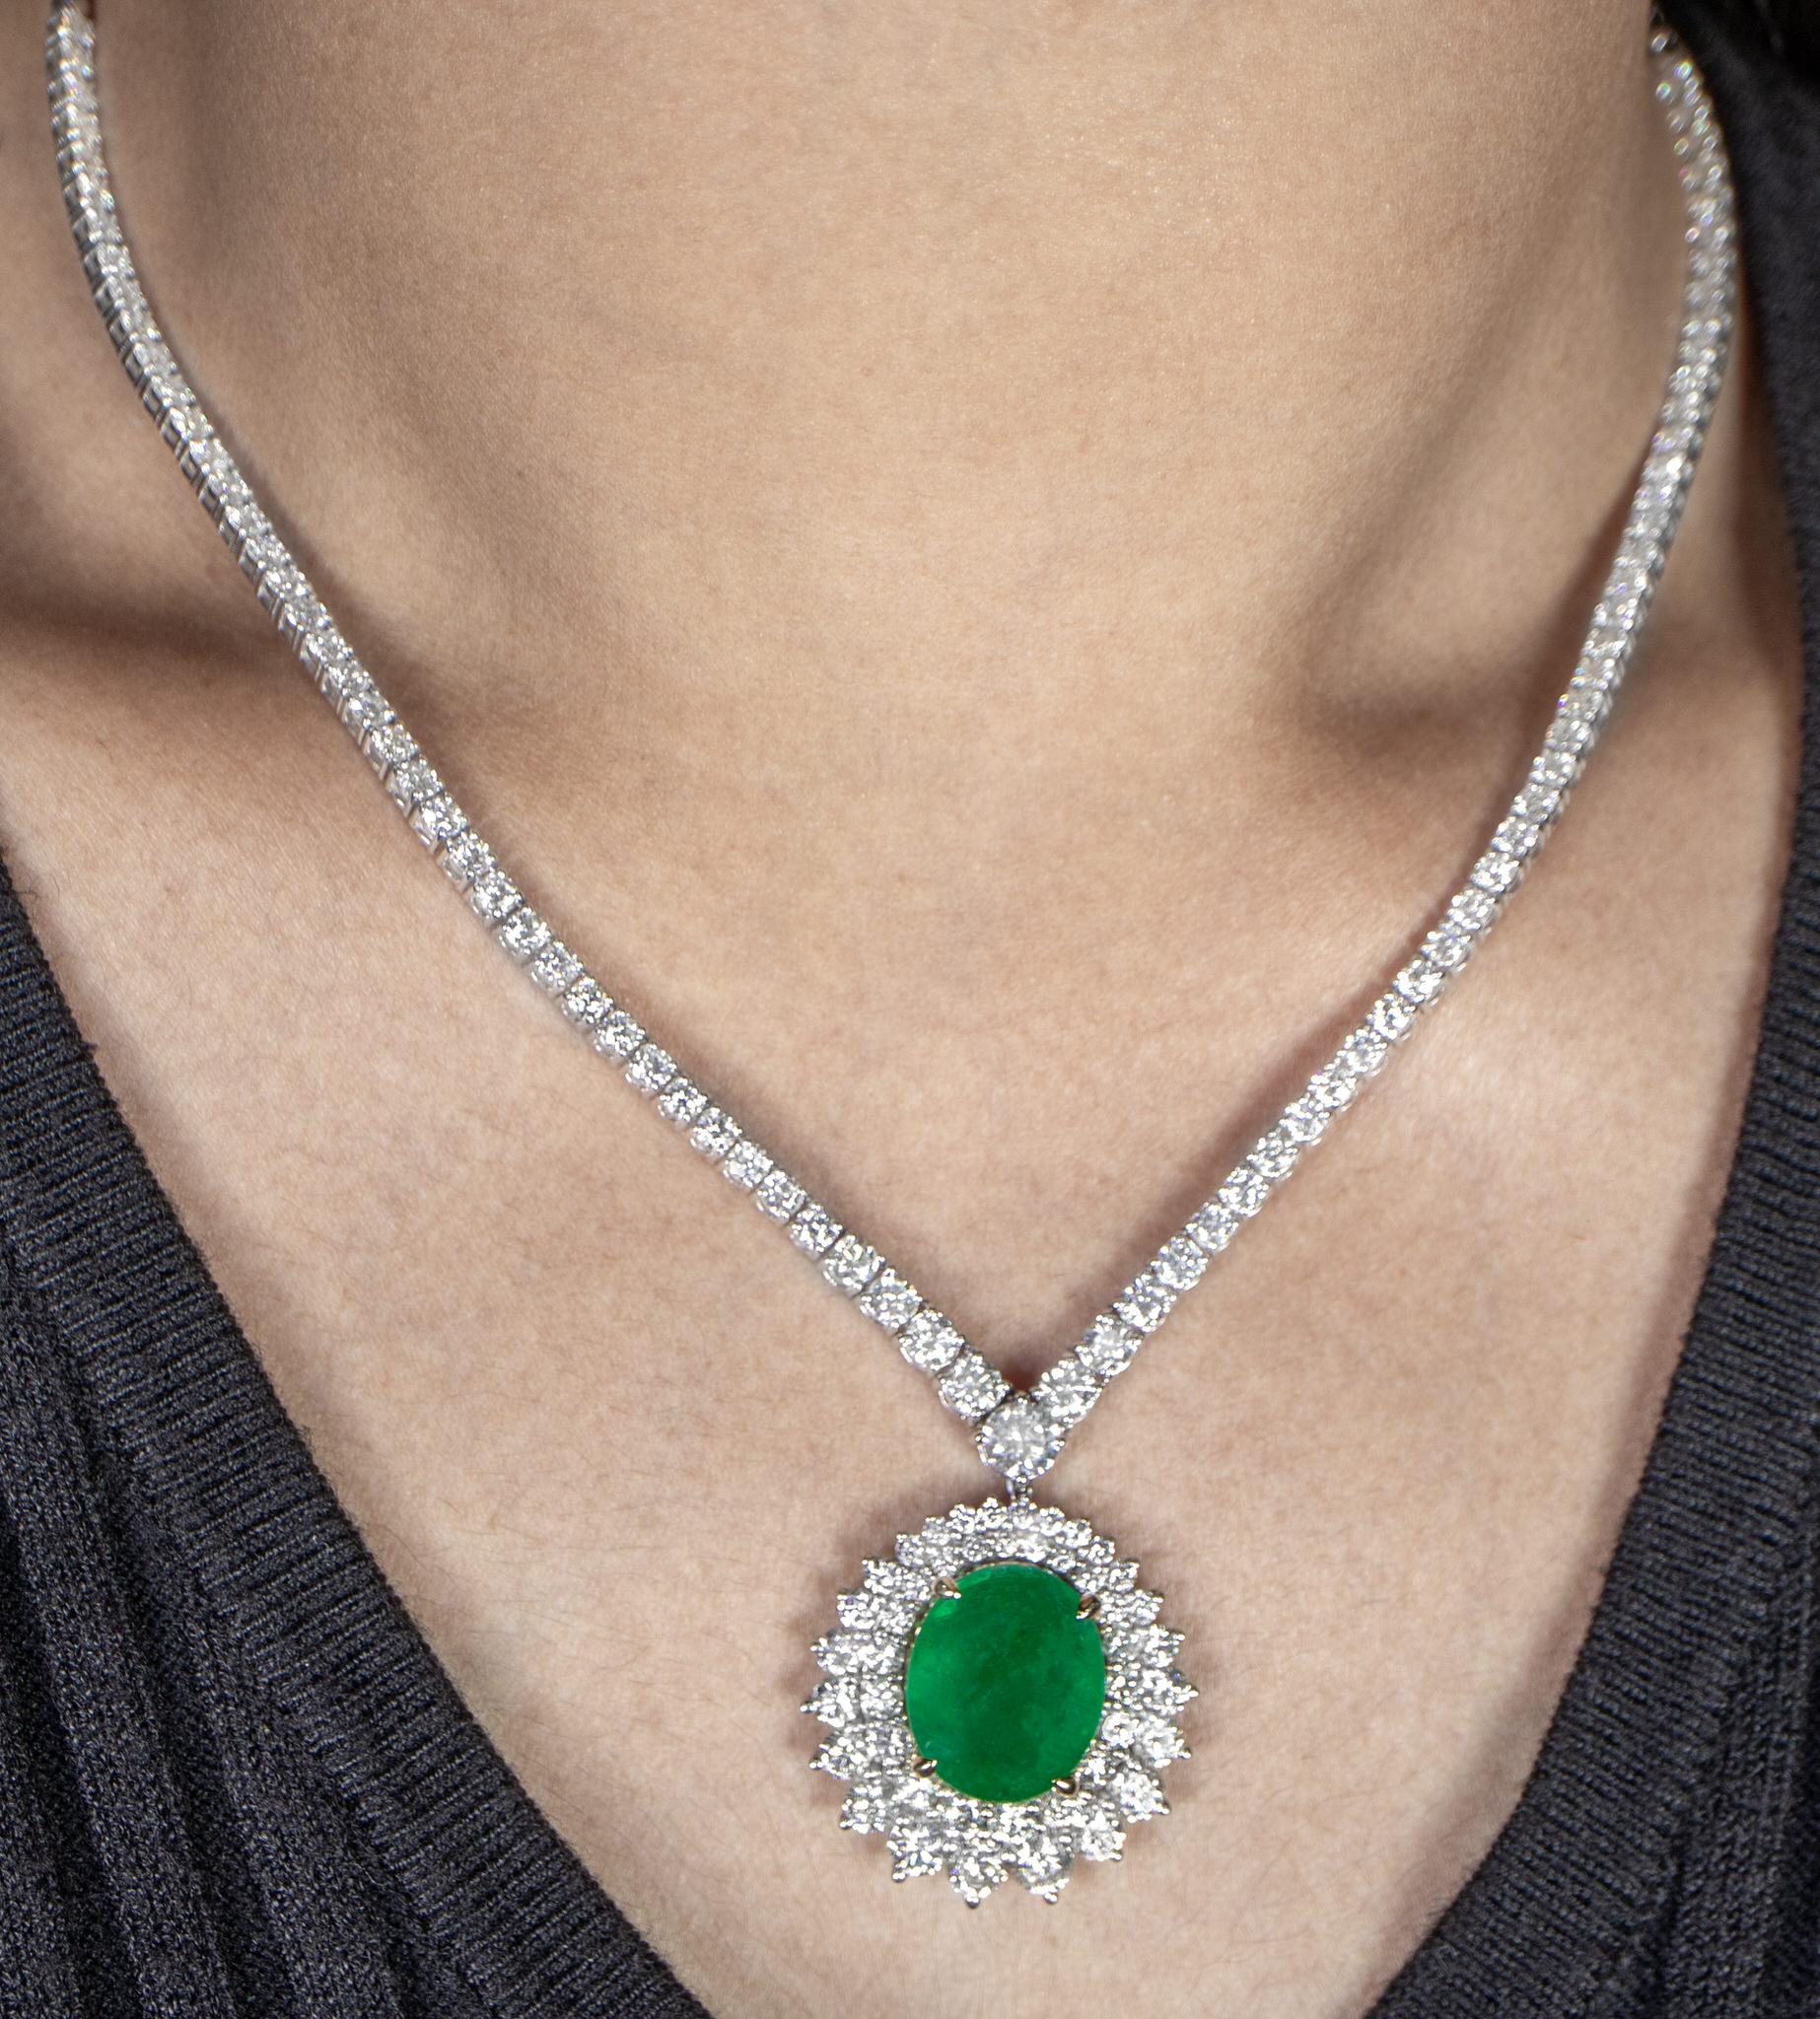 It comes with the Gemological Appraisal by GIA GG/AJP
All Gemstones are Natural
Emerald = 9.80 Carats
Diamonds = 10.40 Carats
Metal: 18K White Gold
Length: 16 Inches